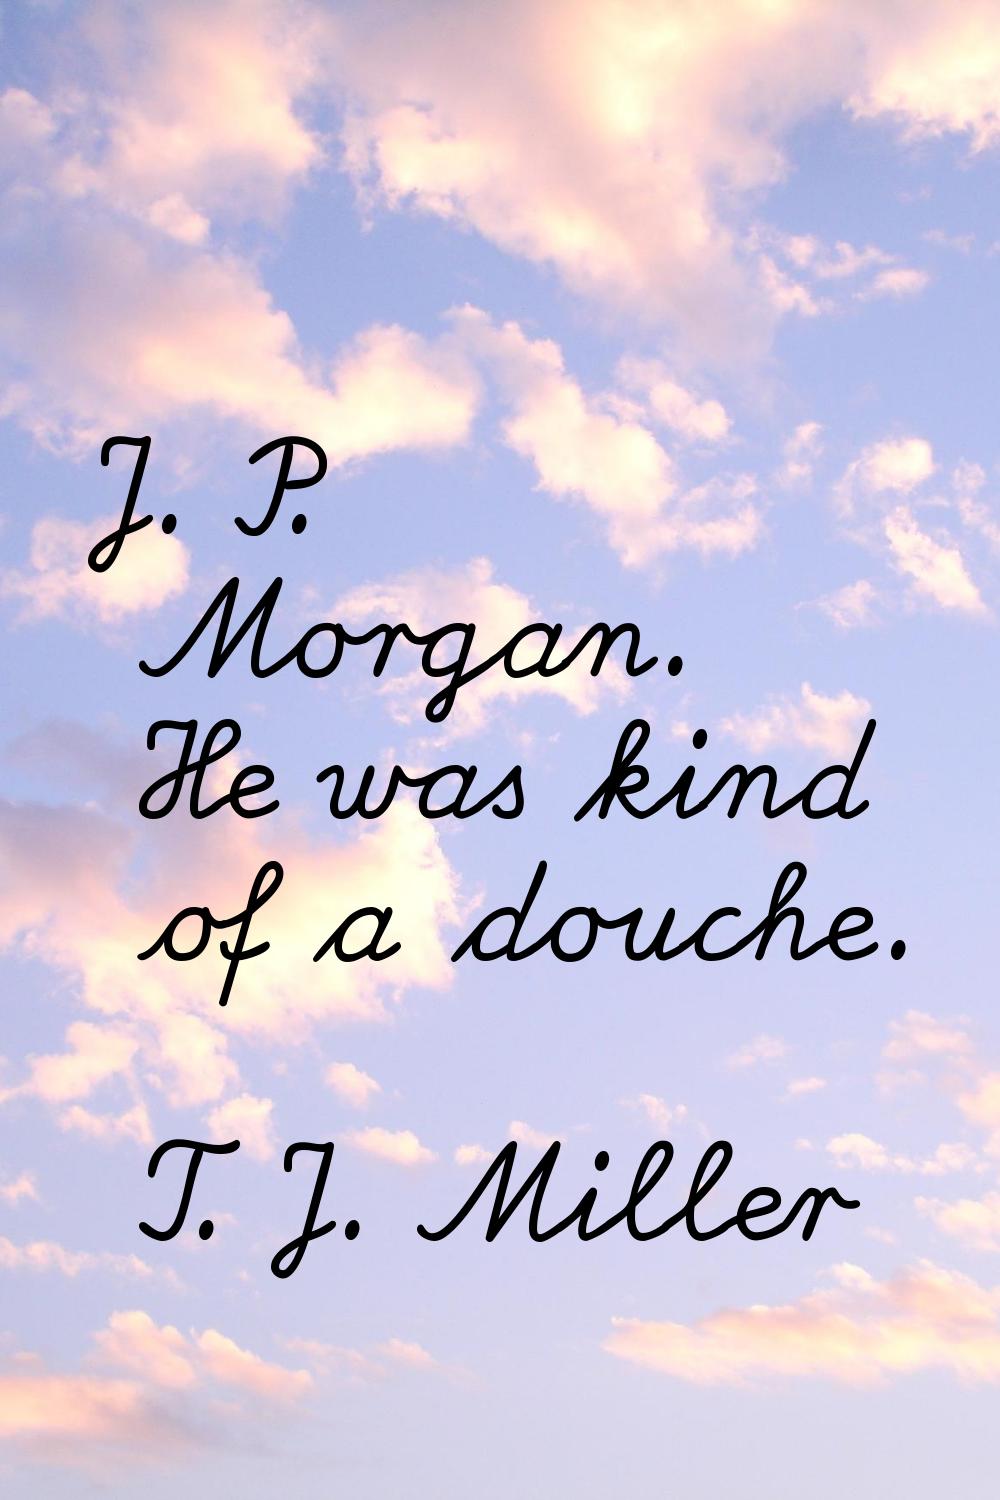 J. P. Morgan. He was kind of a douche.